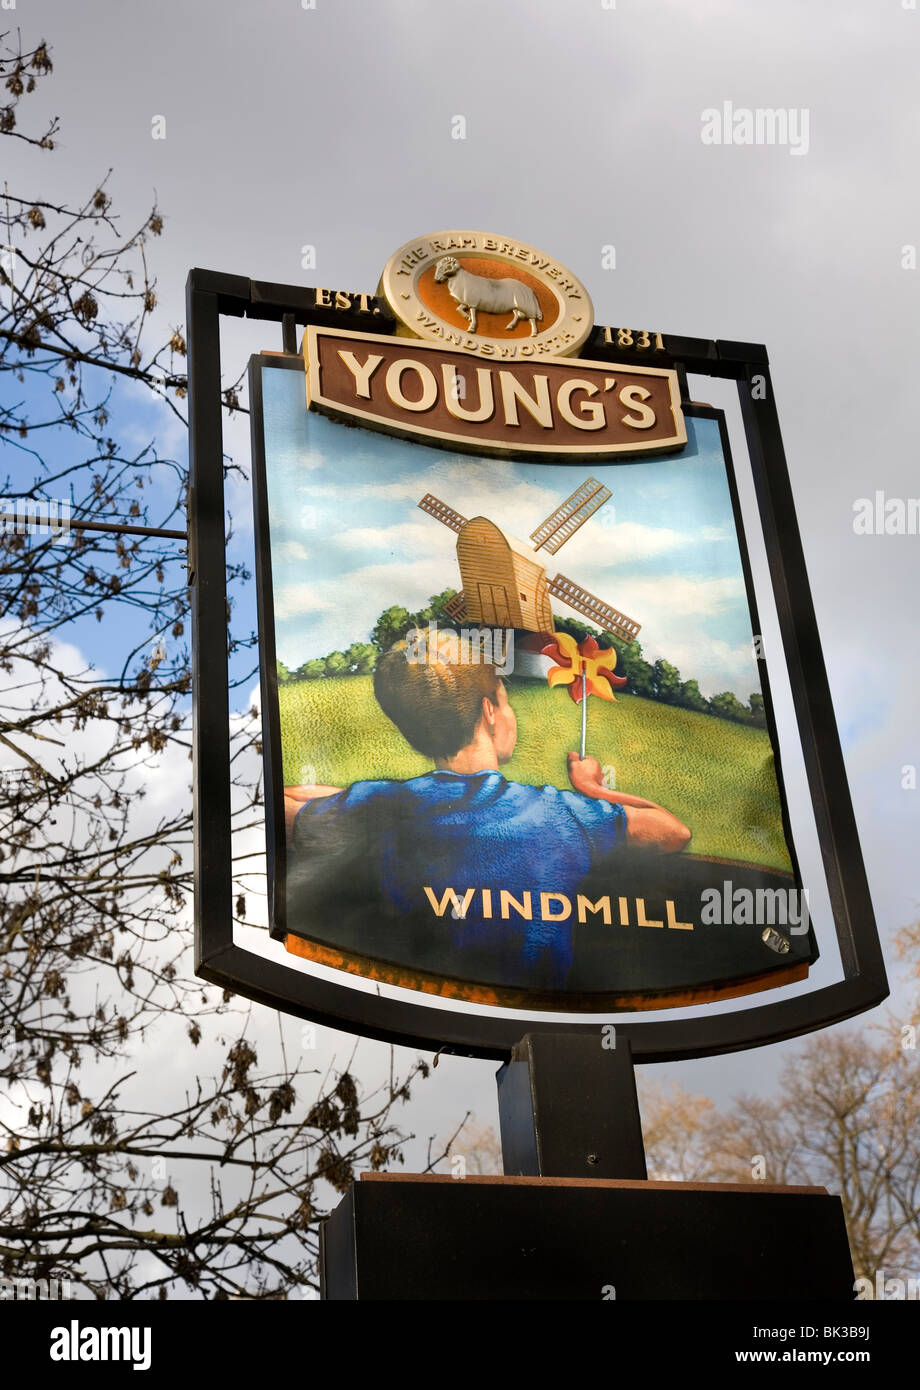 Young's Pub Sign at The Windmill, Clapham Stock Photo